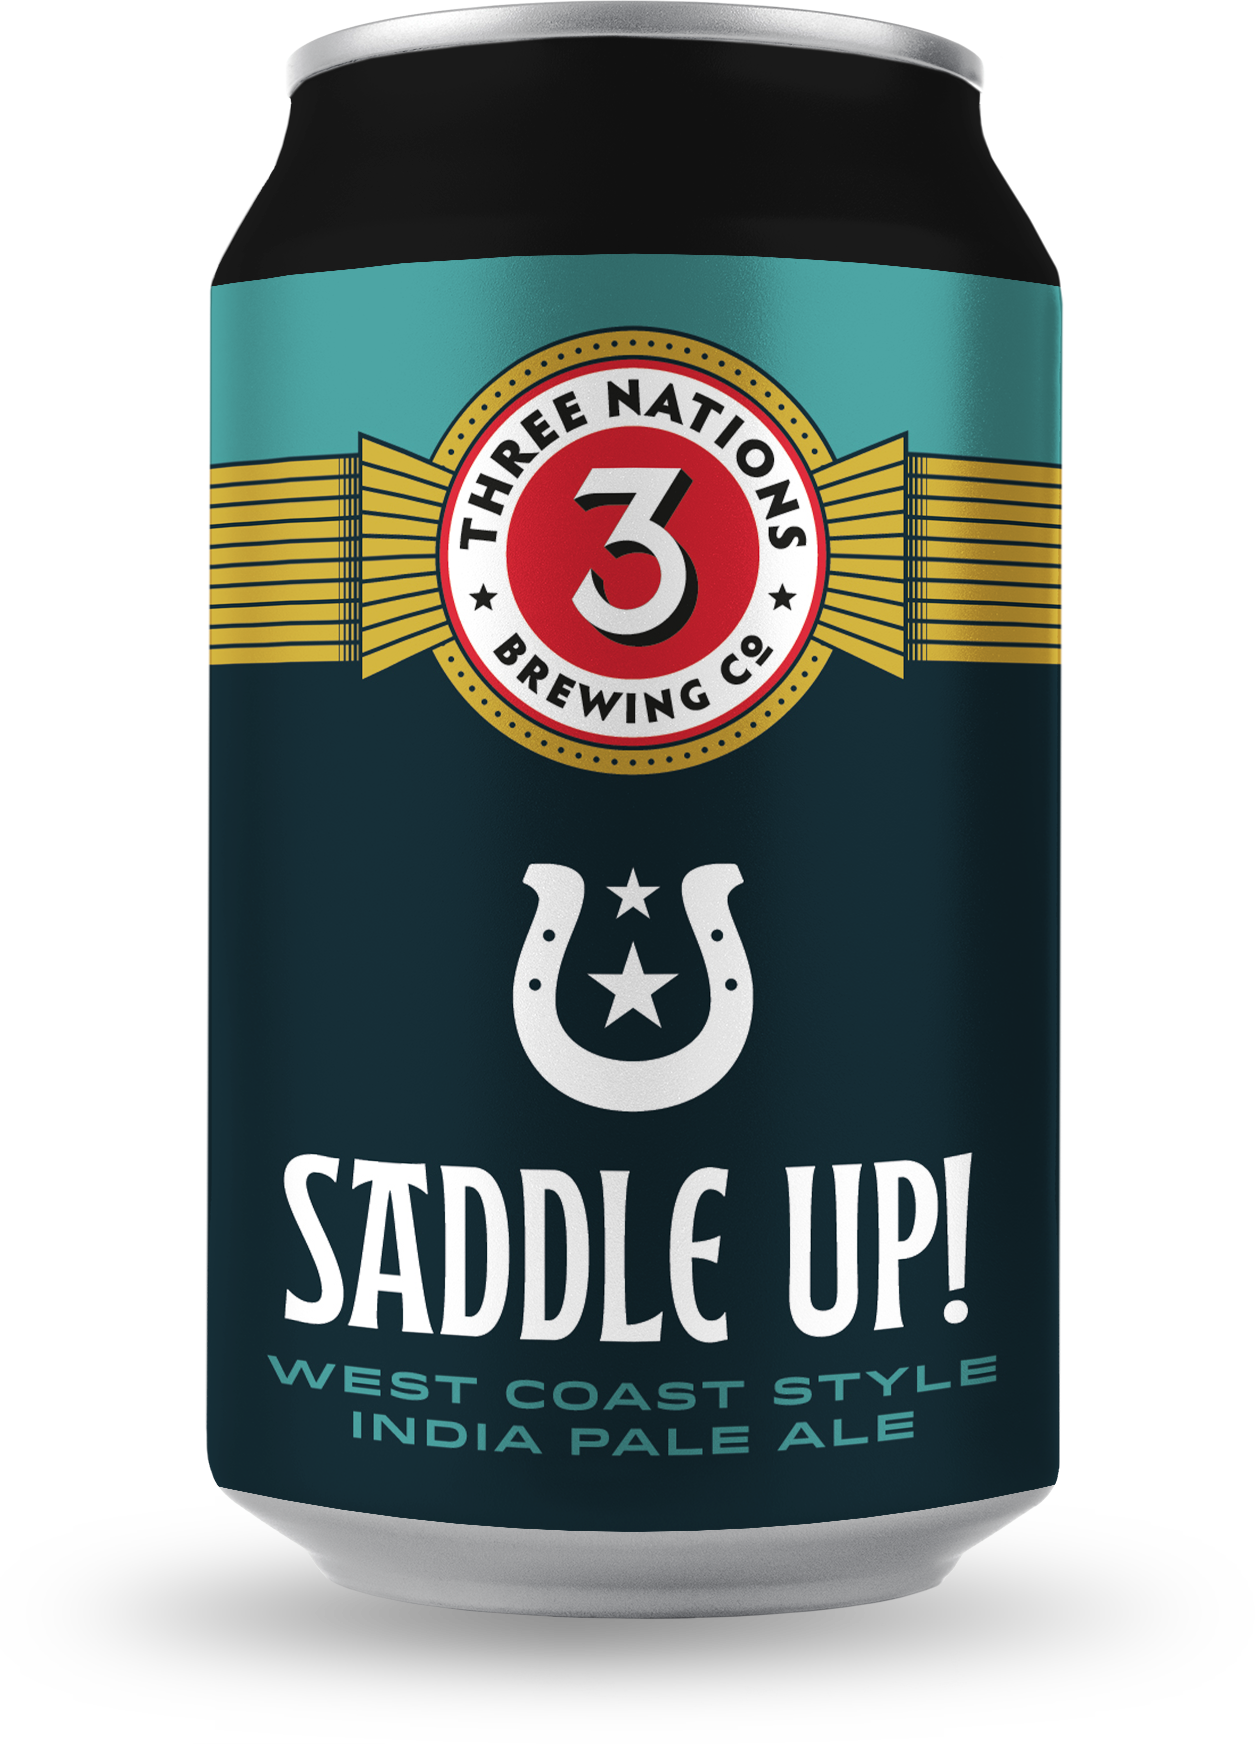 3 Nations Brewing's Saddle Up can design